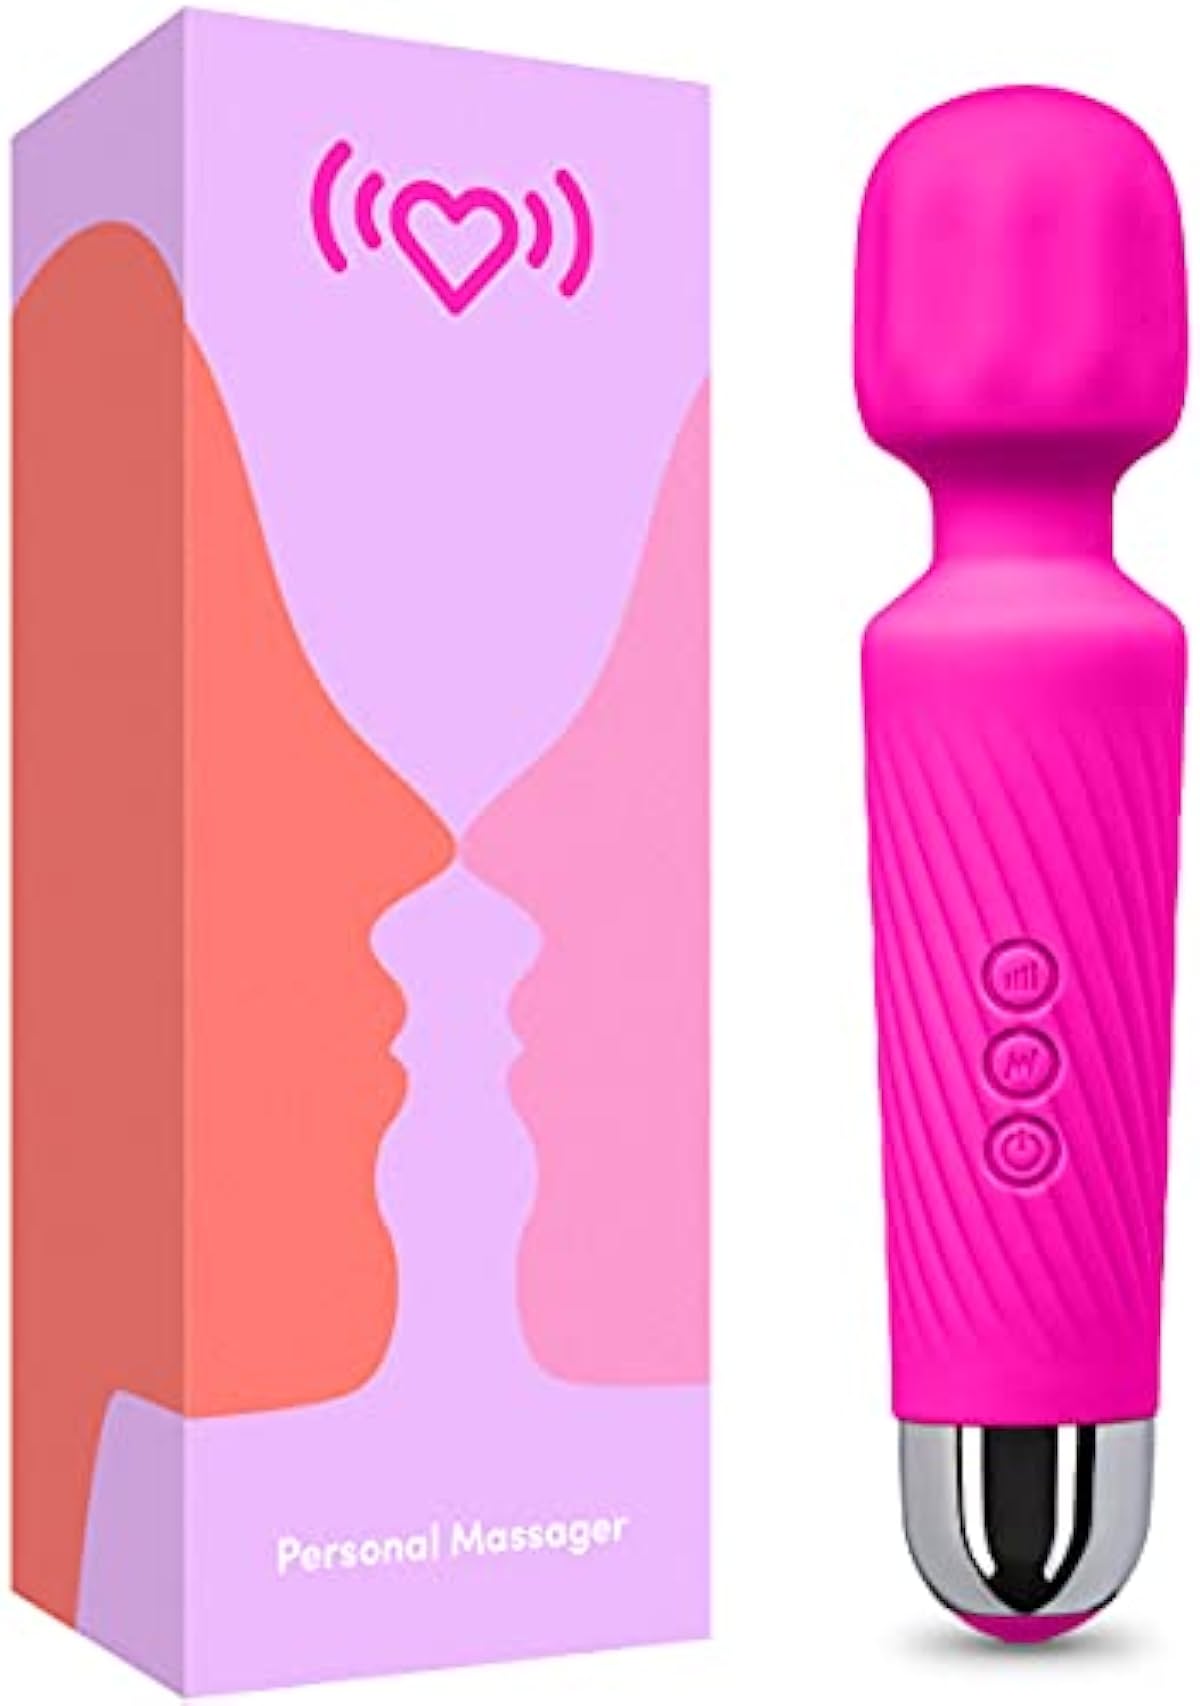 Rechargeable Personal Massager - Quiet & Waterproof - 20 Patterns & 8 Speeds - Travel Bag Included - Men & Women - Perfect for Tension Relief, Muscle, Back, Soreness, Recovery (Hot Pink)